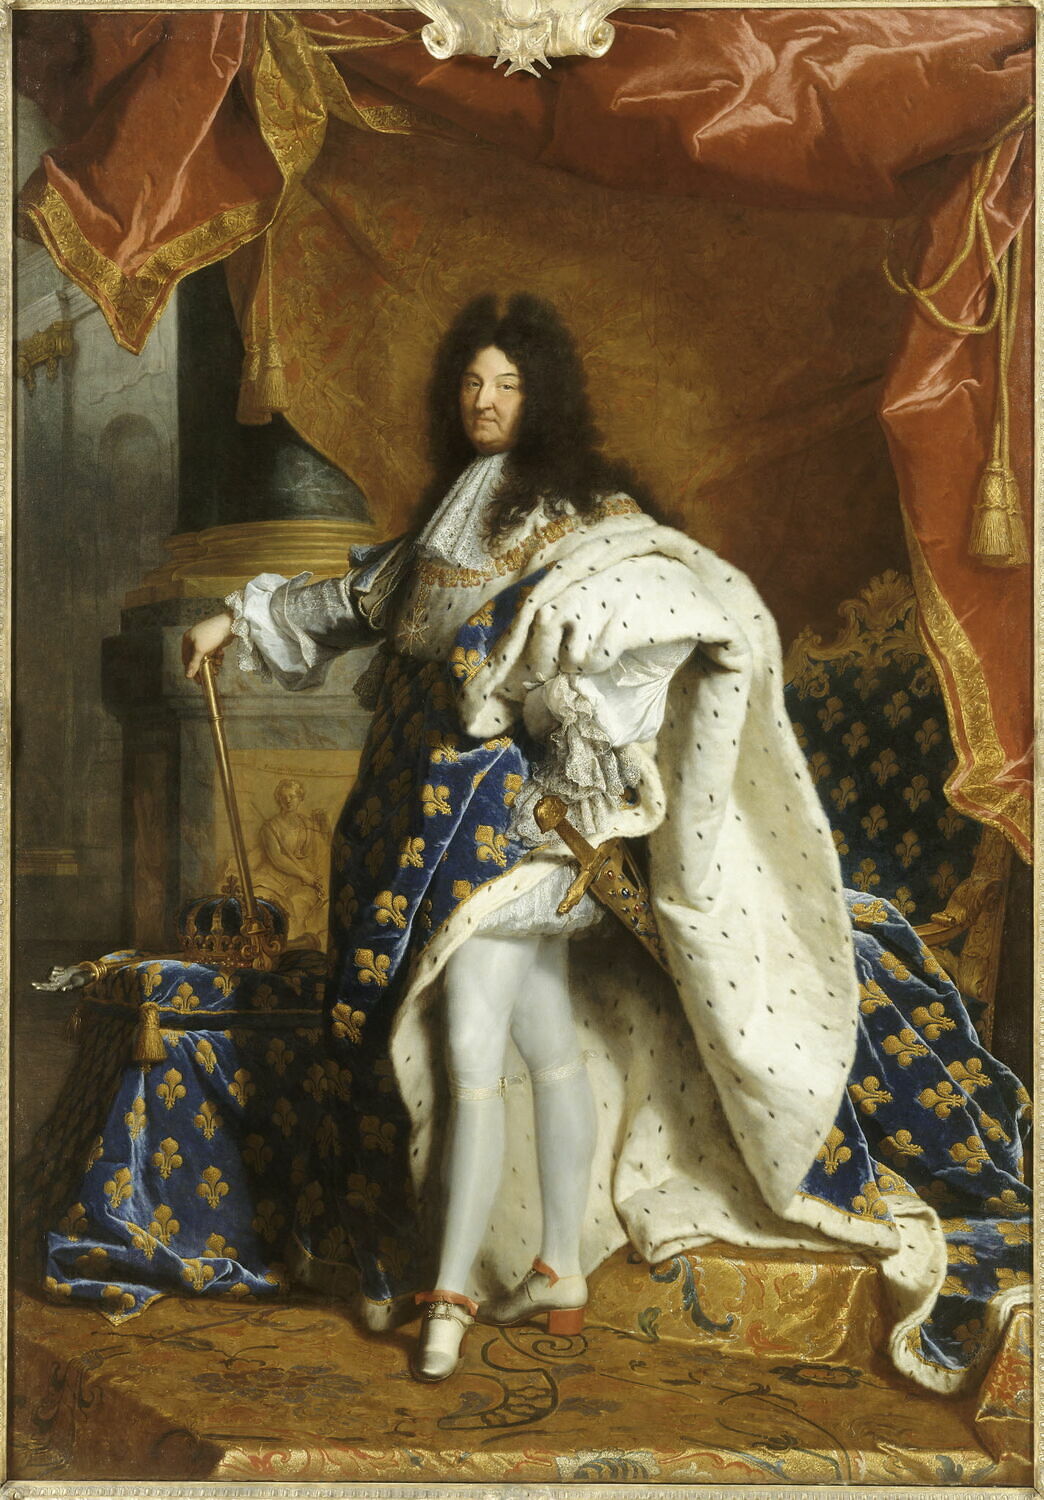 King Louis XIV painted by Hyacinthe Rigaud, 1701